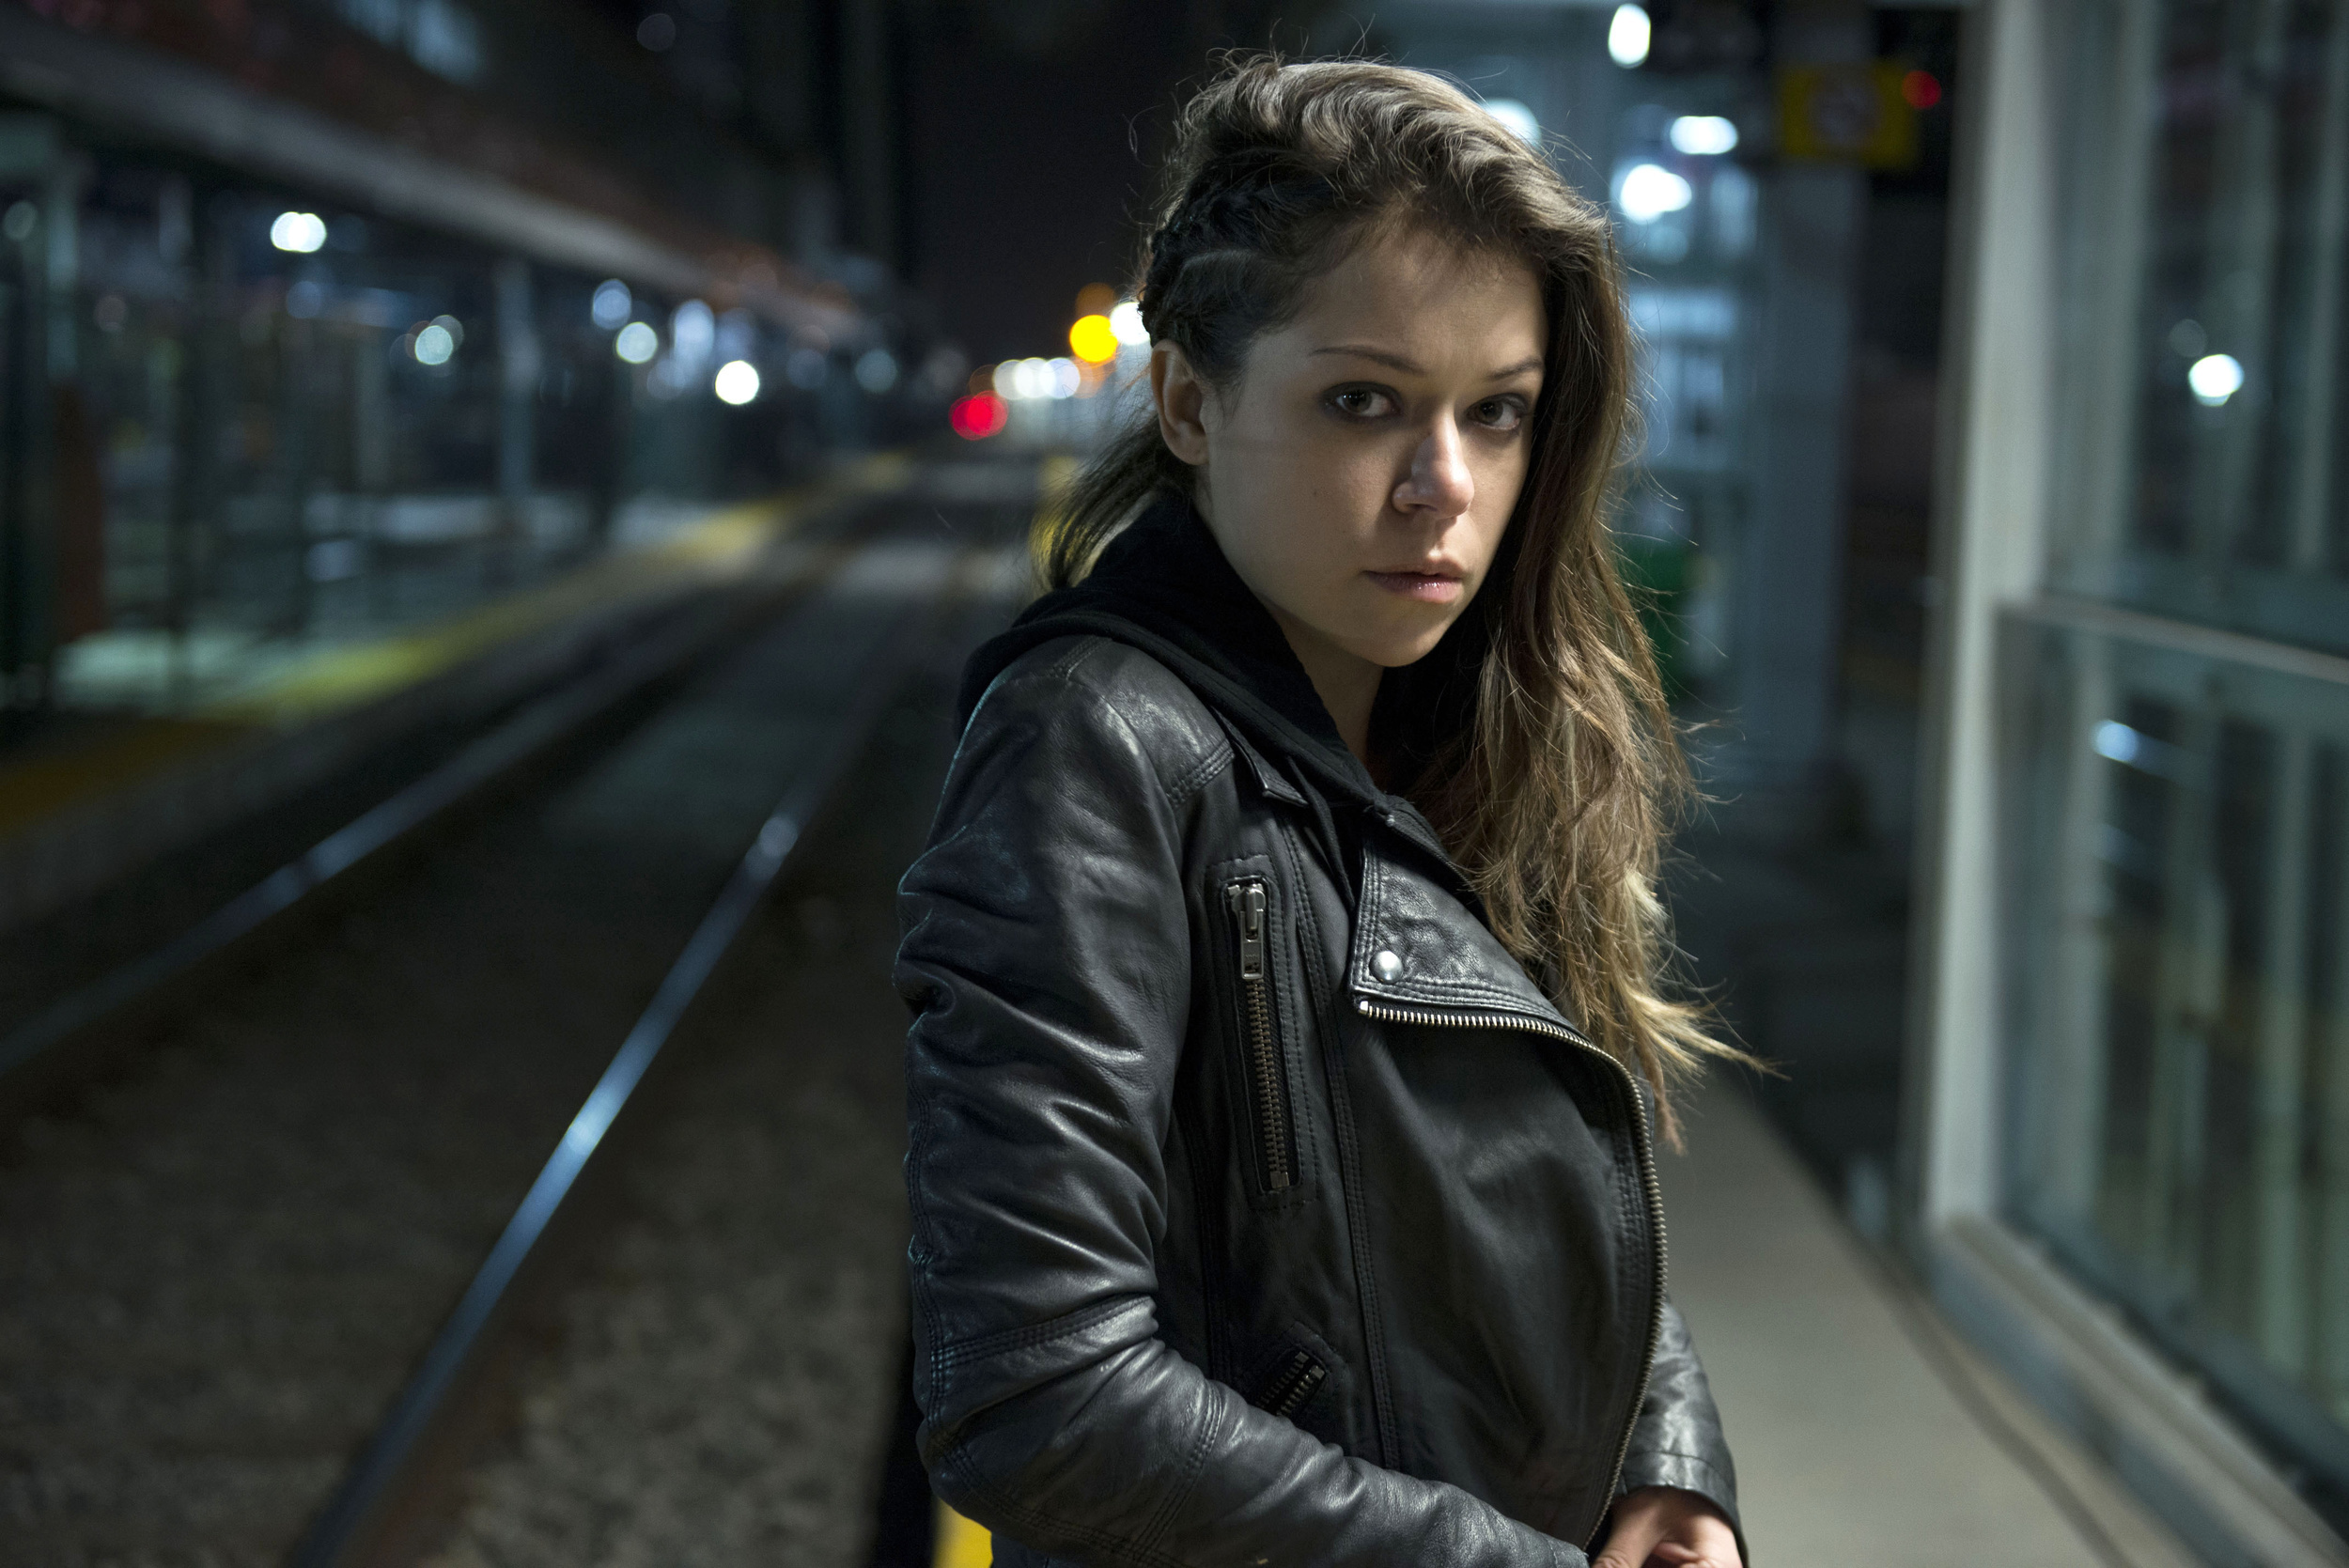 <p>Tatiana Maslany is nothing short of brilliant in <span><em>Orphan Black</em>, </span>in which she plays several clones, including the main character, Sarah Manning. The series asks some tough questions about the nature of identity and the ethical questions of cloning, but the real highlight is Maslany’s varied and textured performances. It would be remarkable enough if she could create just one character with Manning's emotional depth. Still, she plays several individuals, teasing out their personalities and foibles. It’s the kind of science fiction series that forces the viewer to sit with some uncomfortable questions.</p><p><a href='https://www.msn.com/en-us/community/channel/vid-cj9pqbr0vn9in2b6ddcd8sfgpfq6x6utp44fssrv6mc2gtybw0us'>Follow us on MSN to see more of our exclusive entertainment content.</a></p>